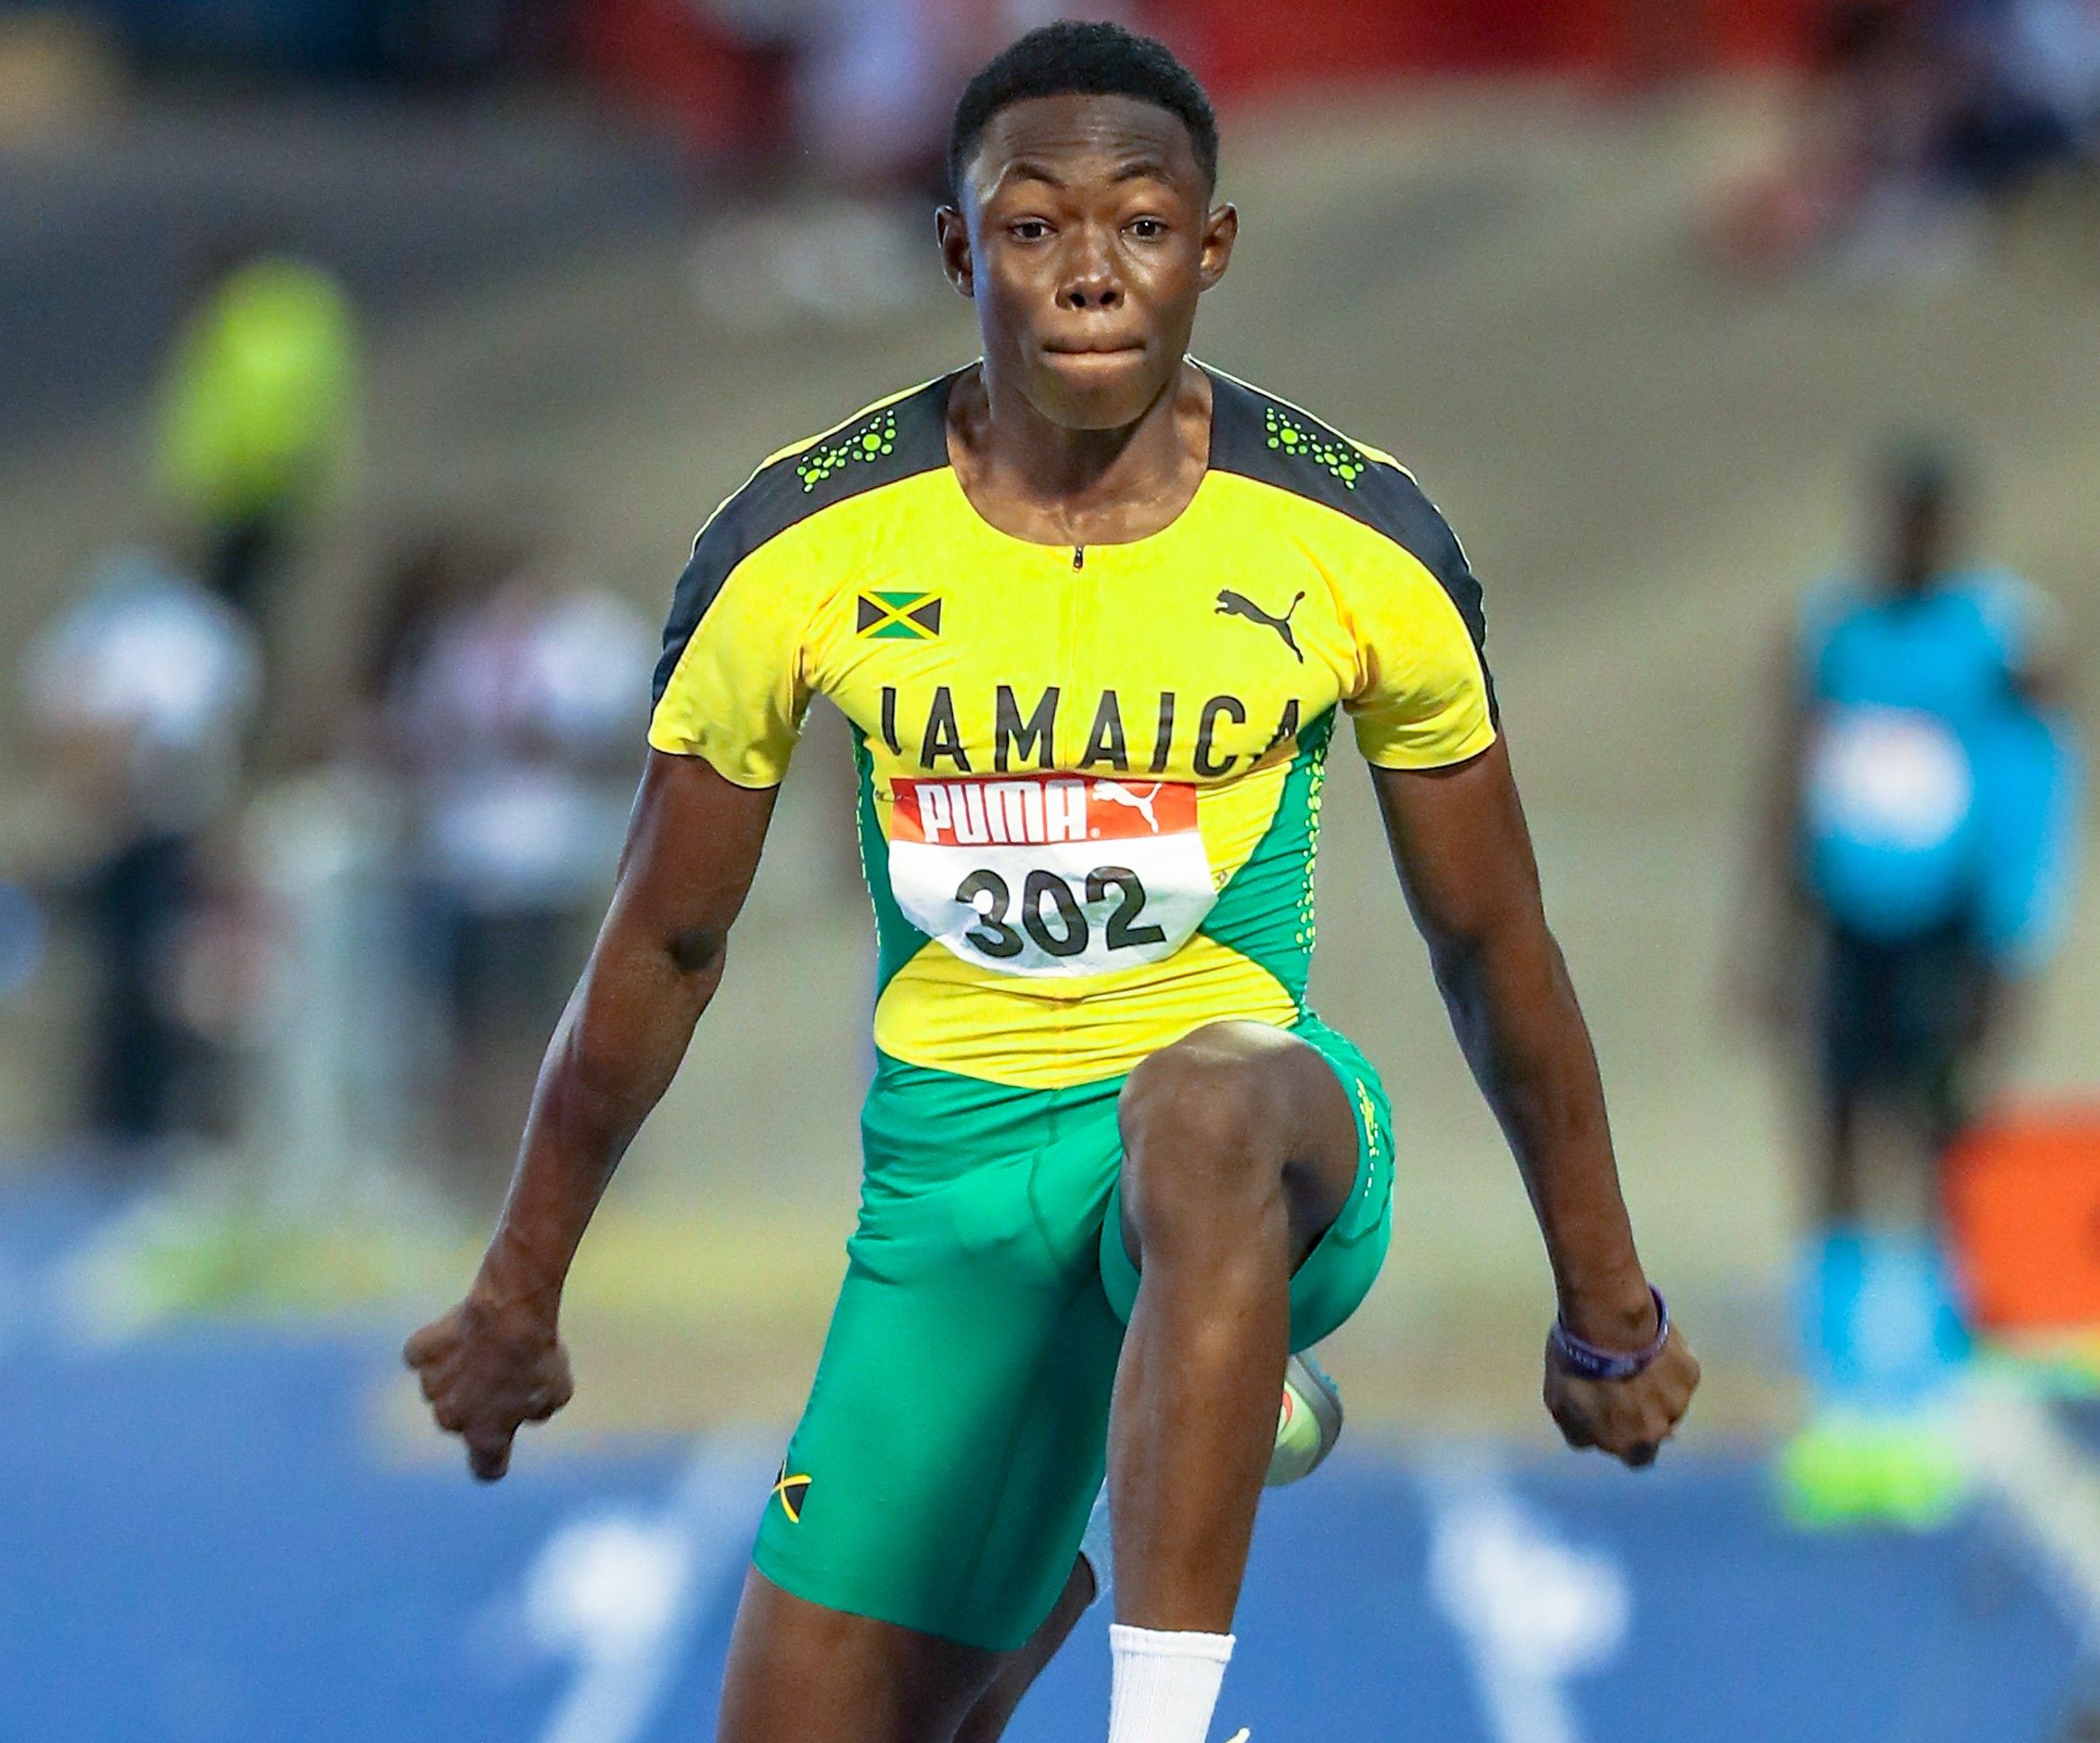 Jaydon Hibbert in the triple jump at the 49th edition of the Carifta Games in Kingston